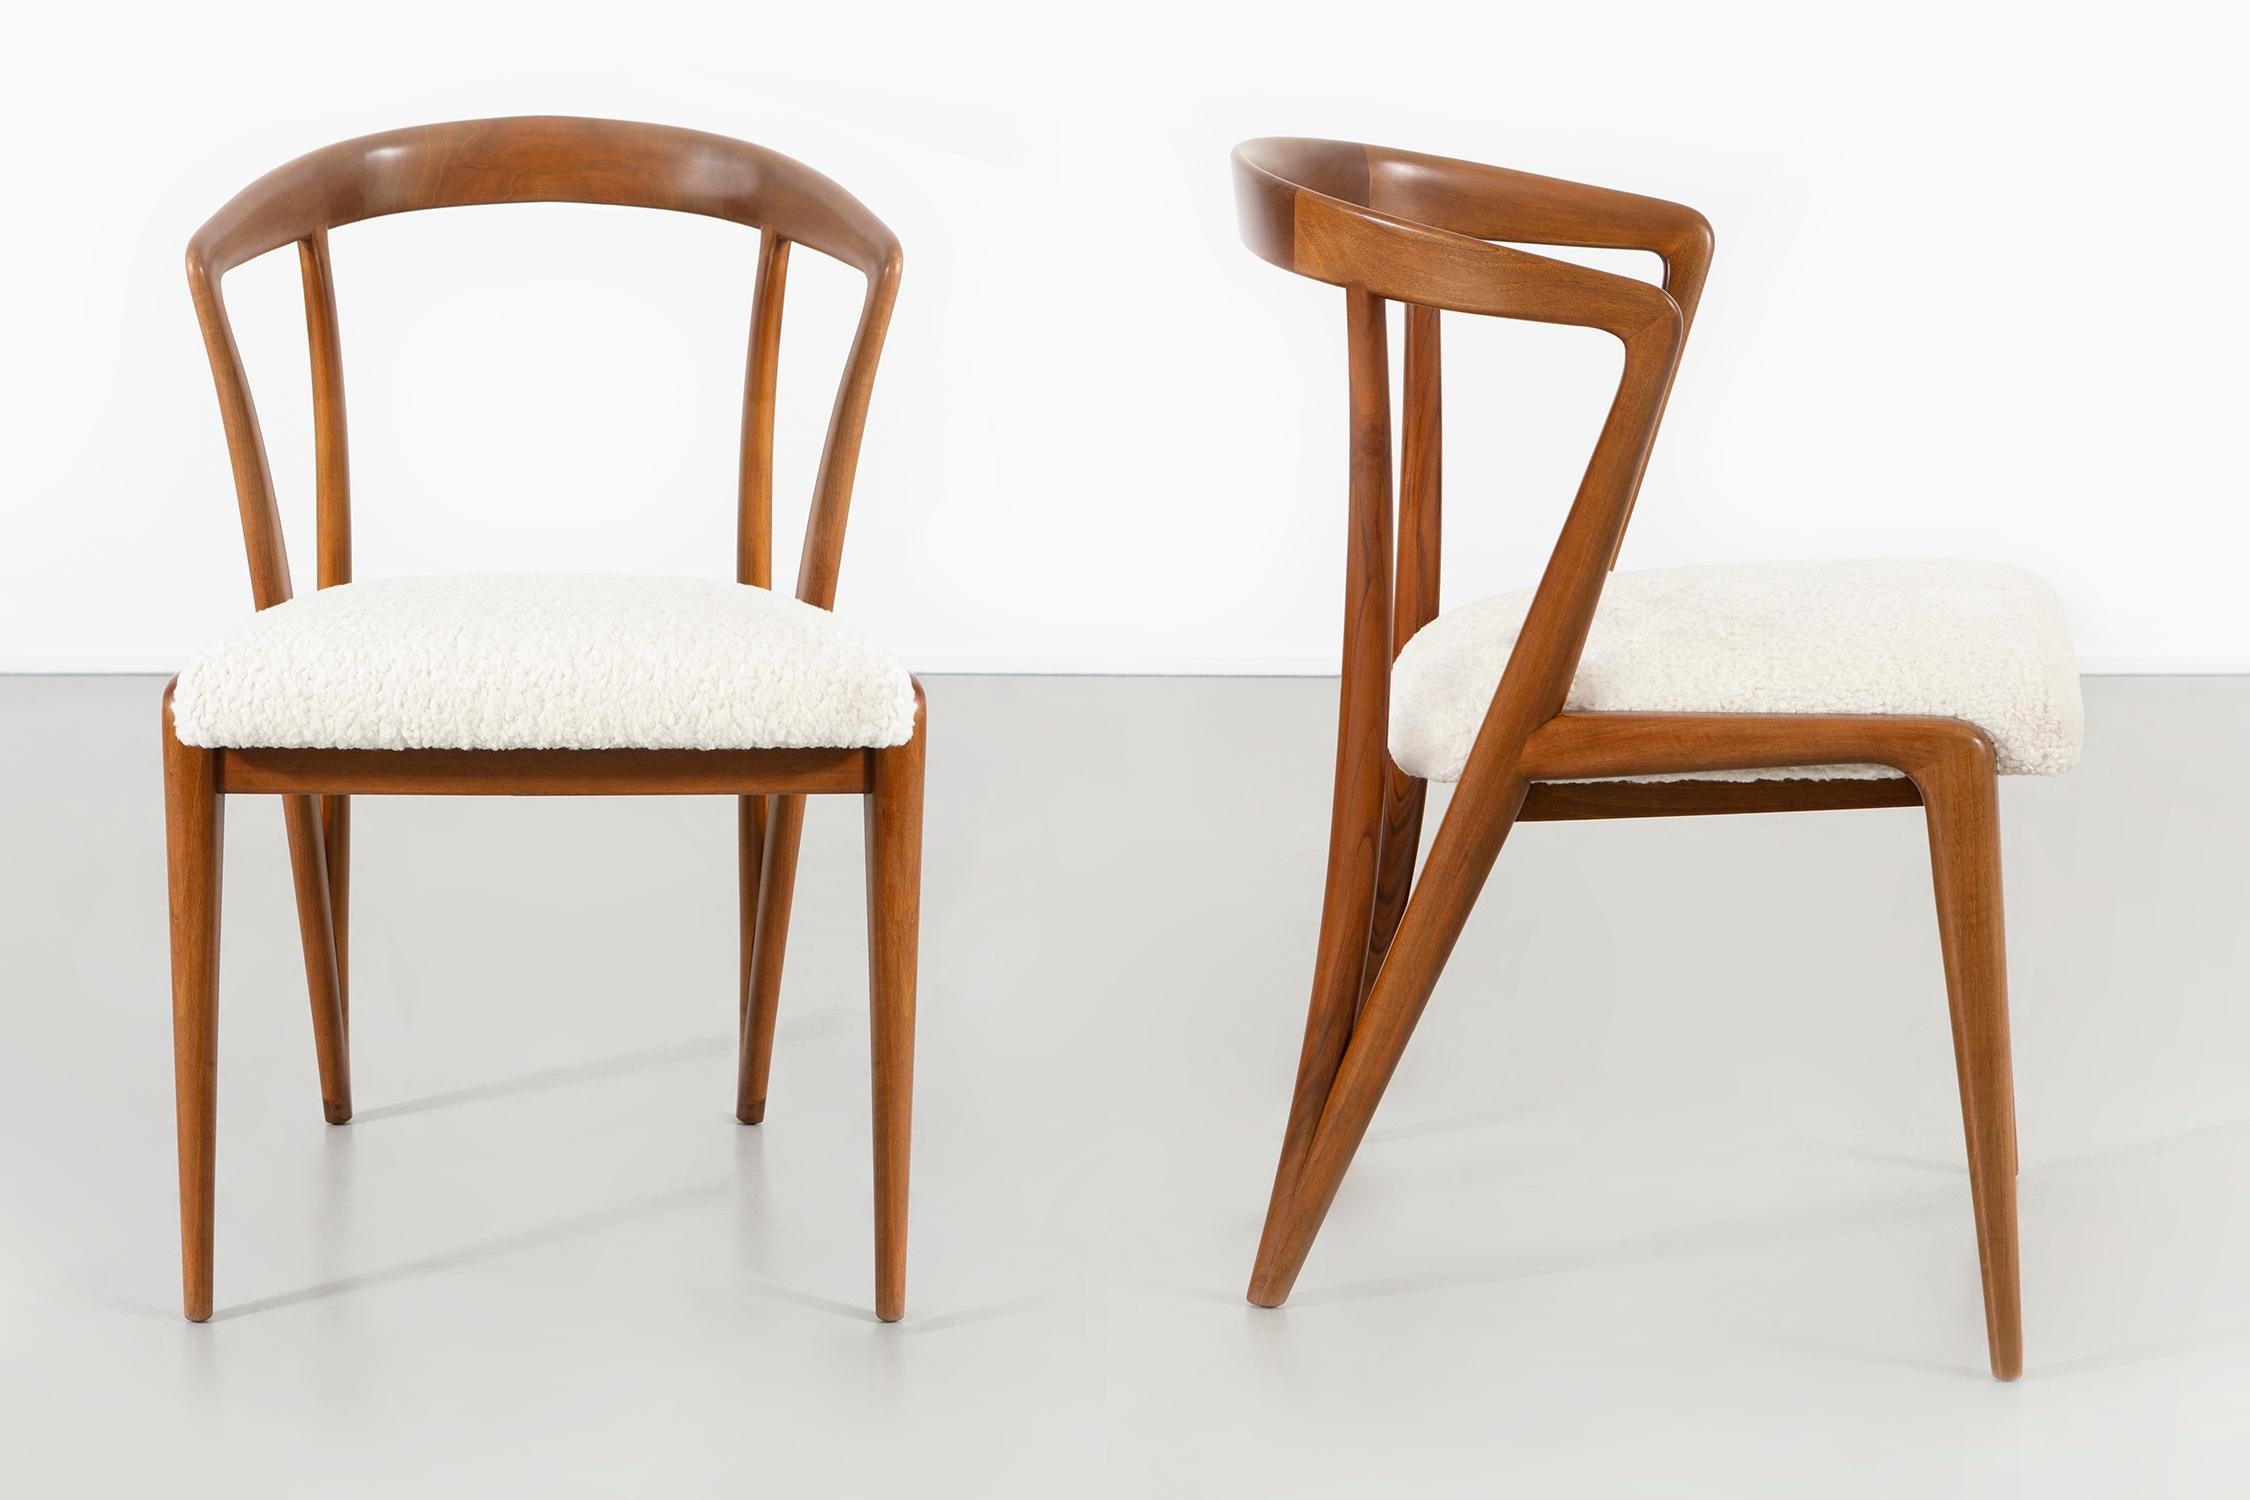 Set of six dining chairs

designed by Bertha Schaefer for Singer and Sons

Italy, circa 1950s

Freshly reupholstered with the walnut frames restored 

Measures: 30 ¾” H x 21 1/16” W x 21 ?” D x 19 ½” seat H

sold as a set

Fabric sample